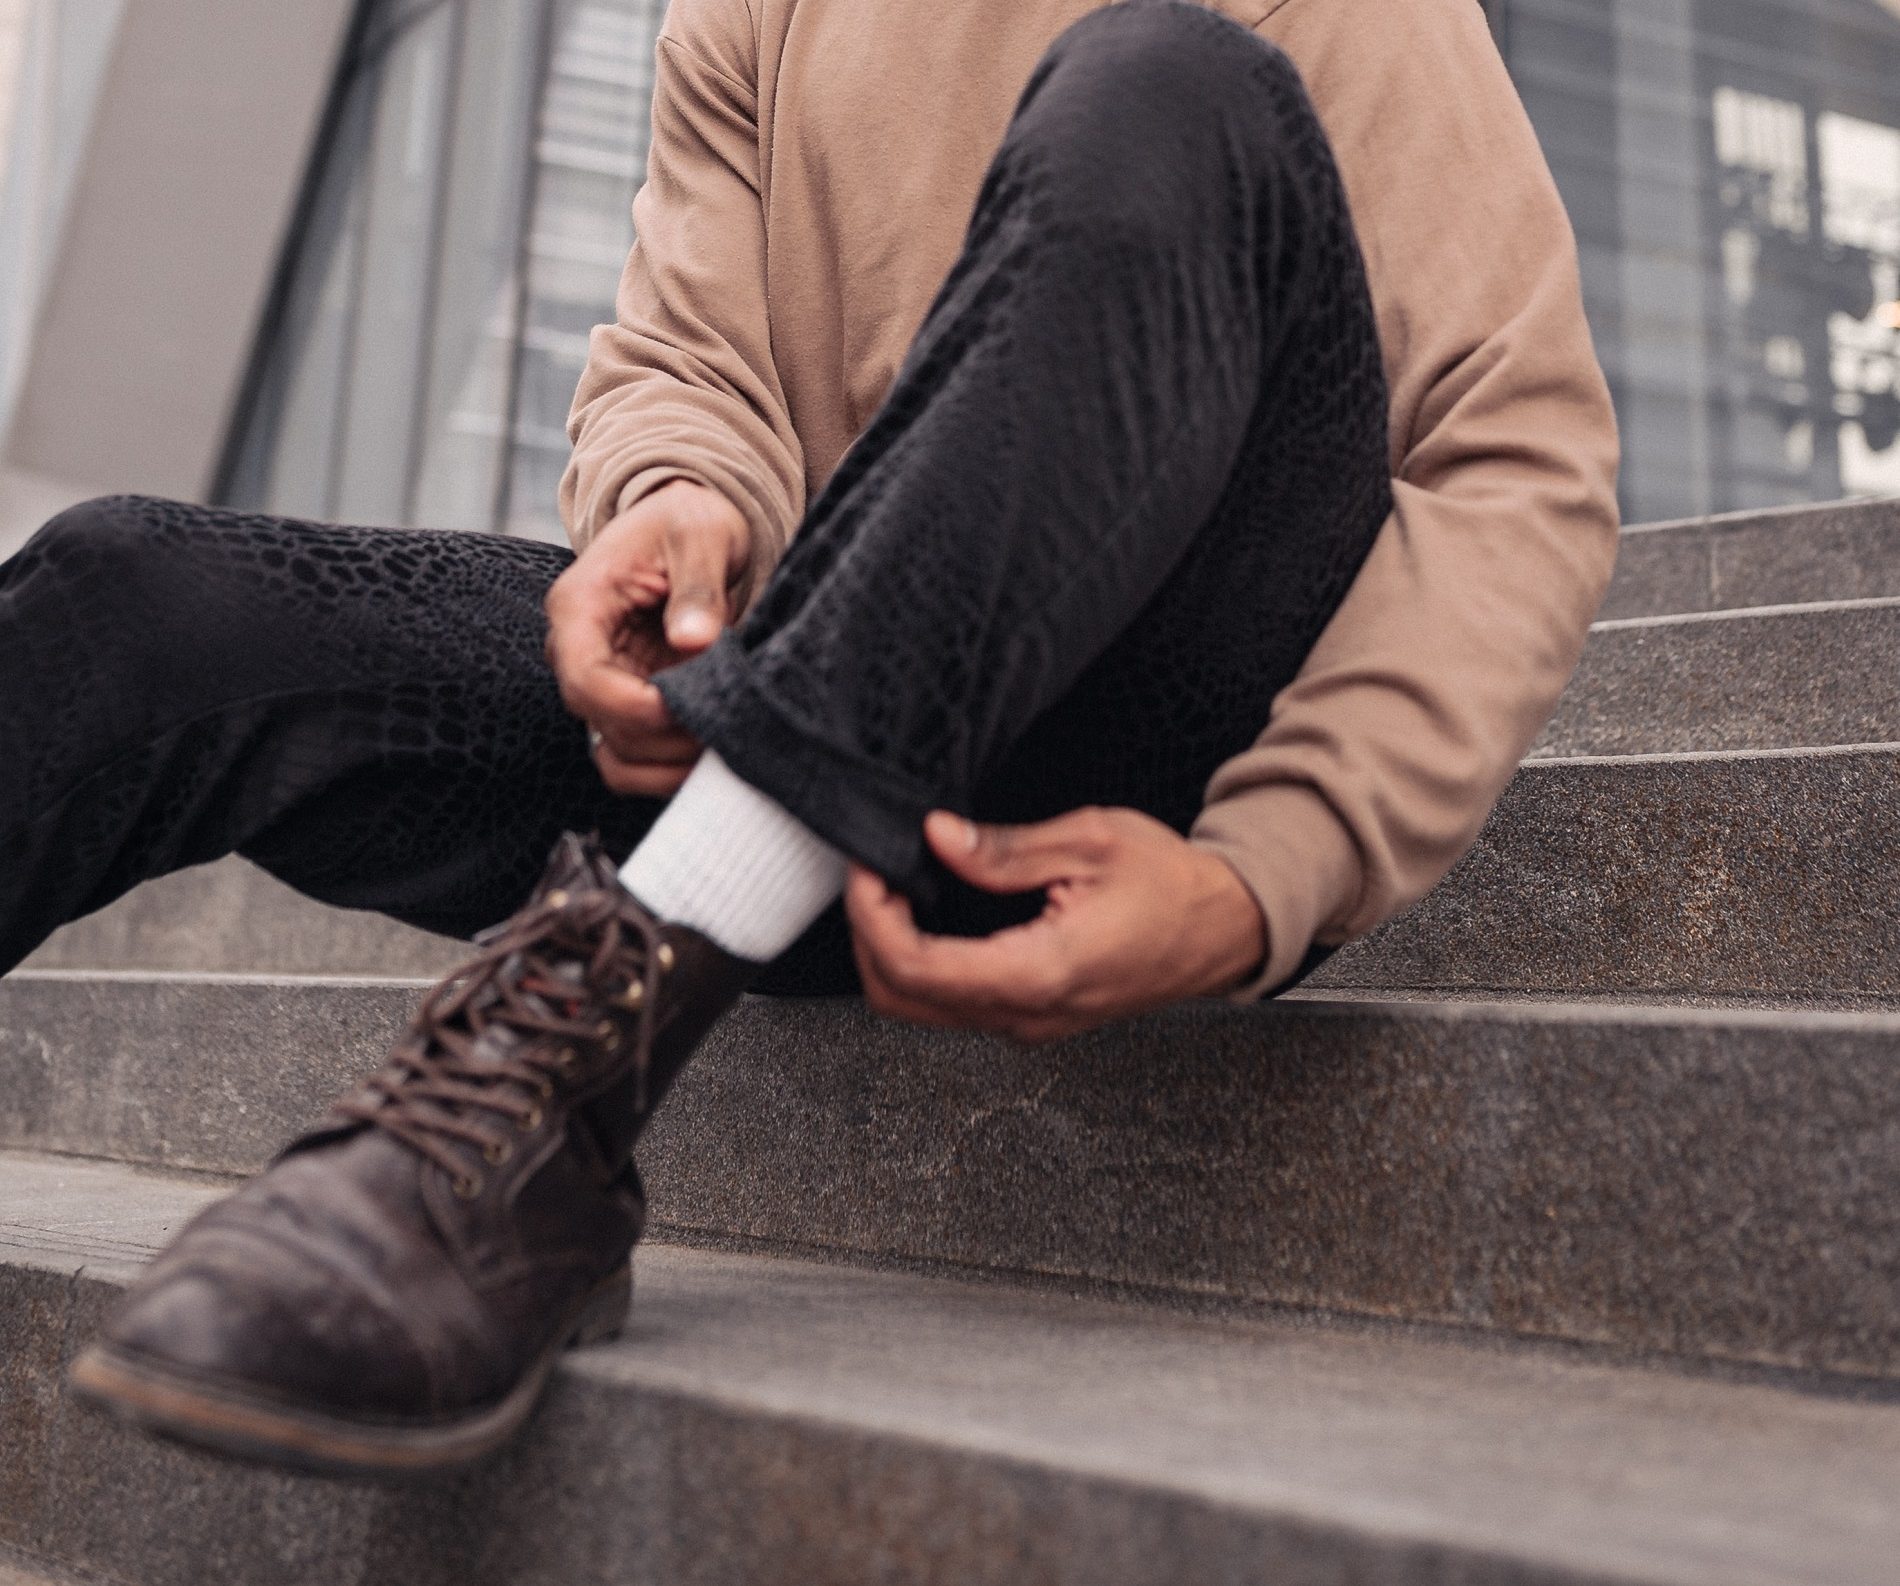 The most fashionable models of men’s shoes for winter